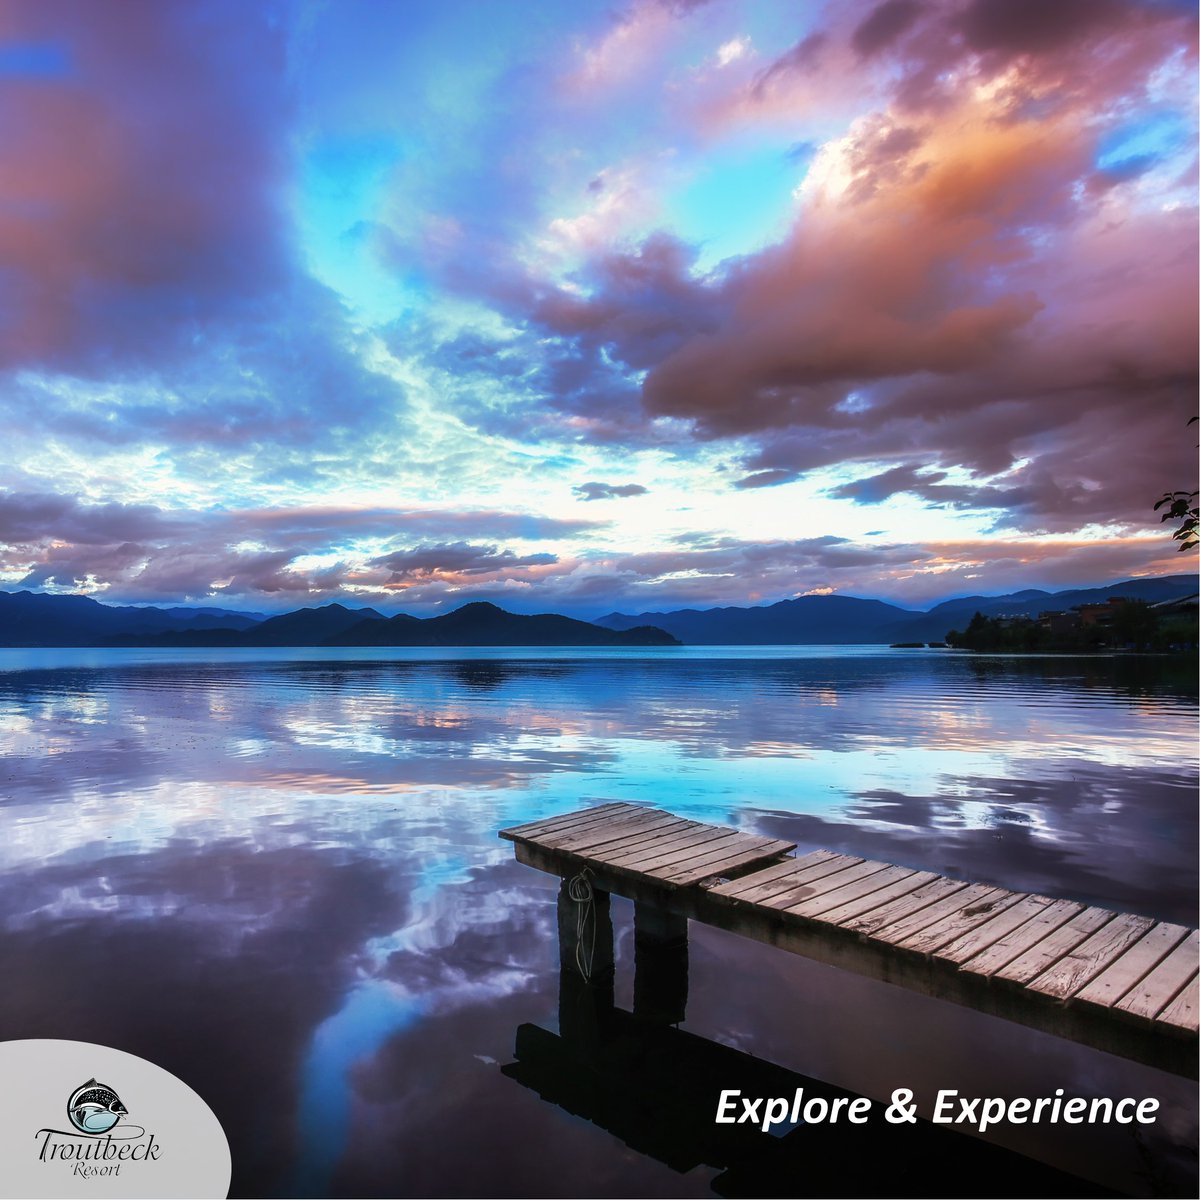 Experience the inspiration and be awed by the magnificent scenery of the Little Connemara lakes and the Troutbeck Valley.​
Enjoy  Nyanga with us this season!

#TroutbeckResort #ProudlyAfricanSun #ExperienceExploreEnjoy